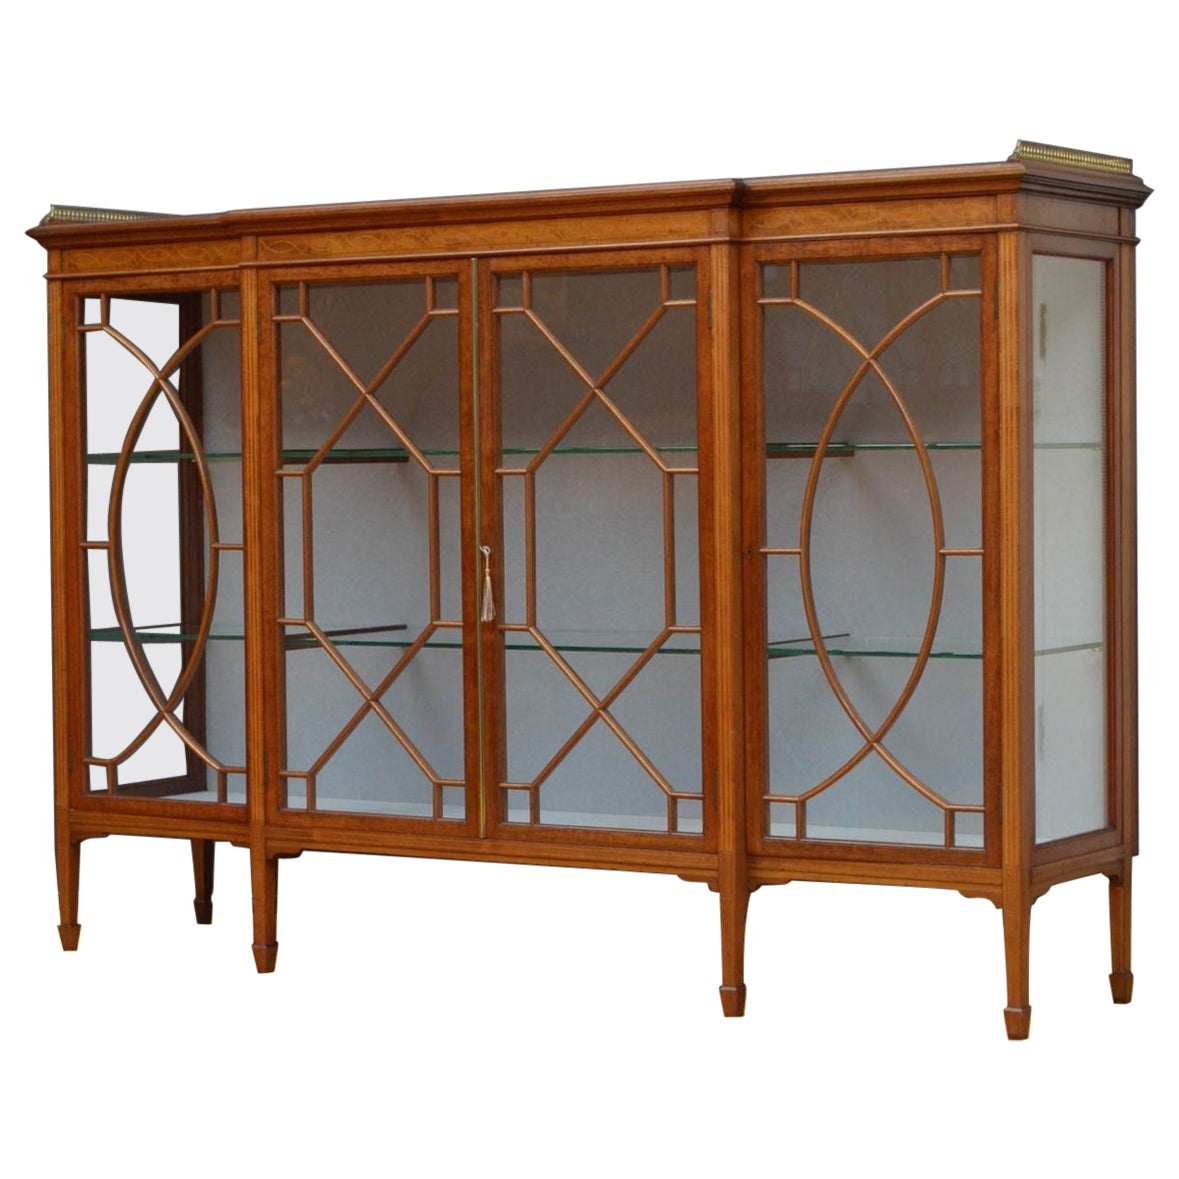 Superb Edwardian Mahogany and Inlaid Display Cabinet For Sale